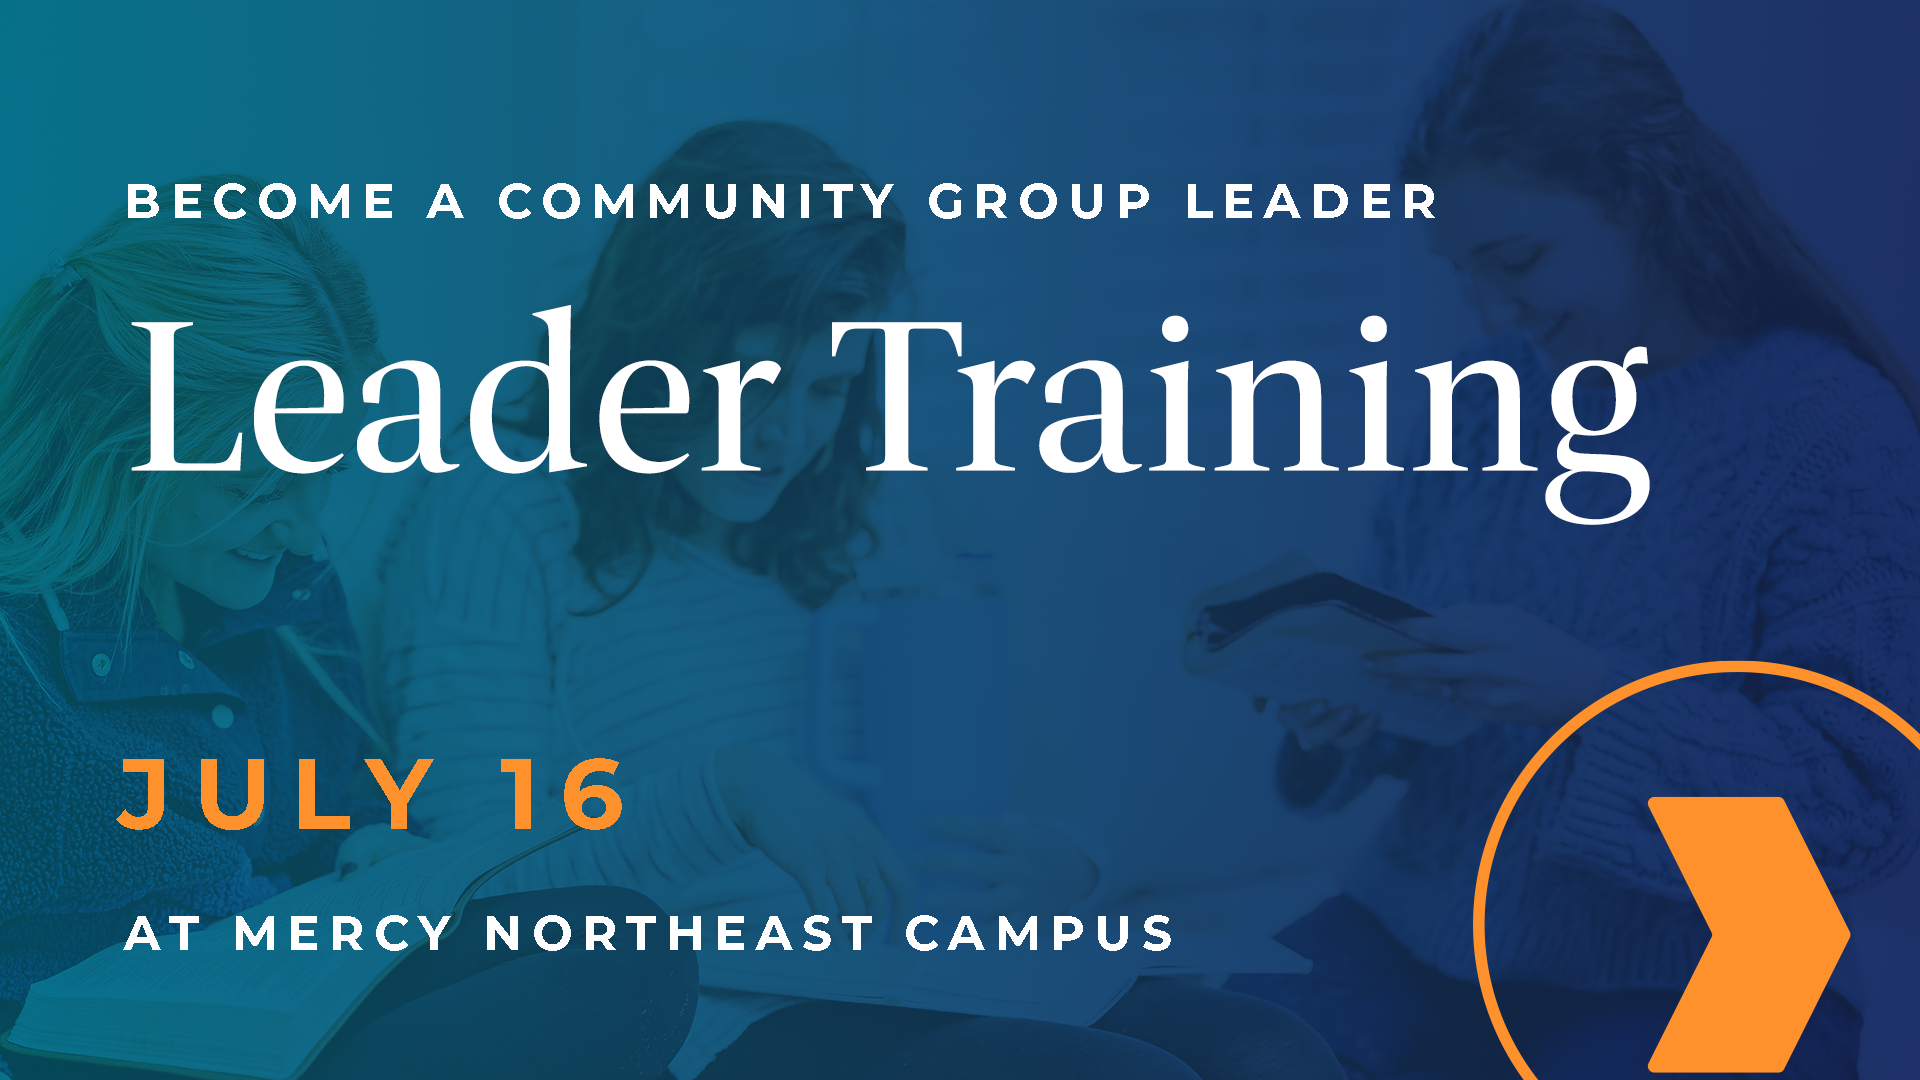 New CG Leader Training with Location - New Community Group Leader Training